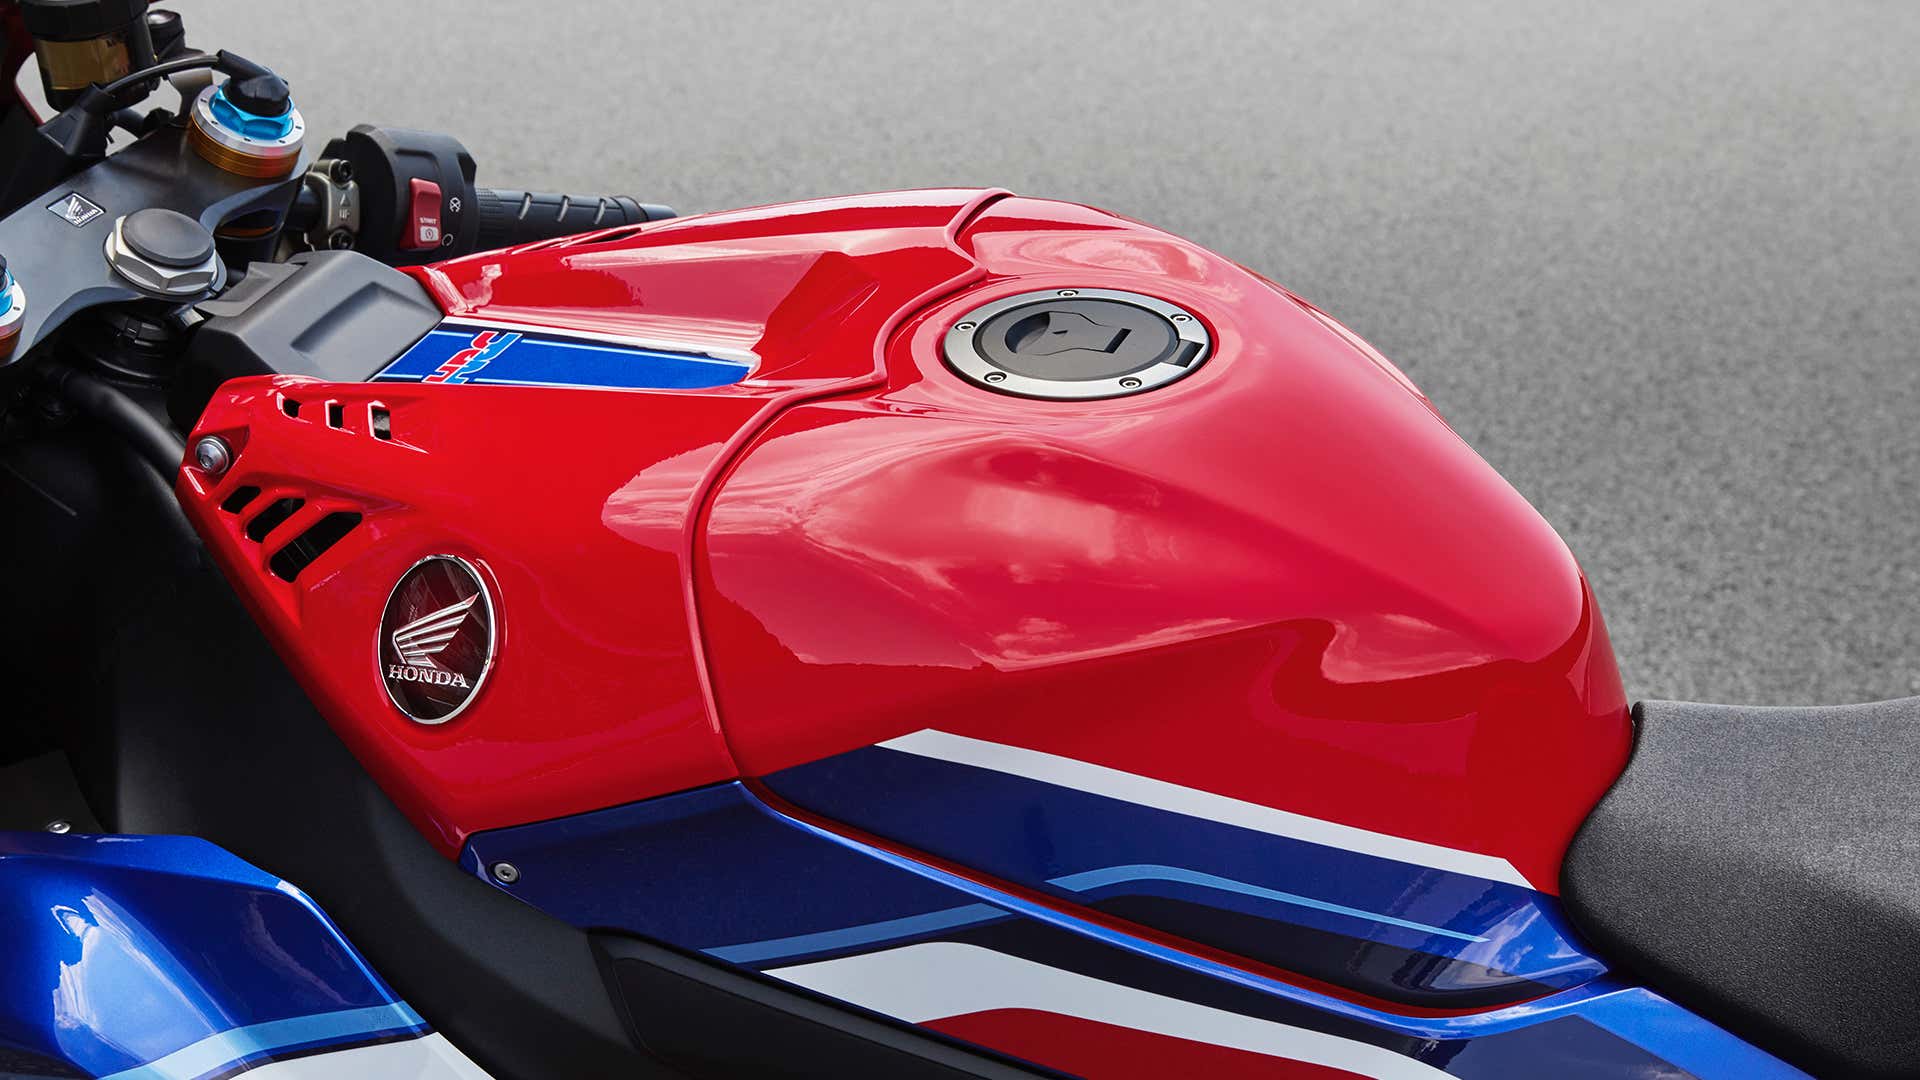 A close-up of the gas tank on a red, white, and blue Honda CBR sport bike.